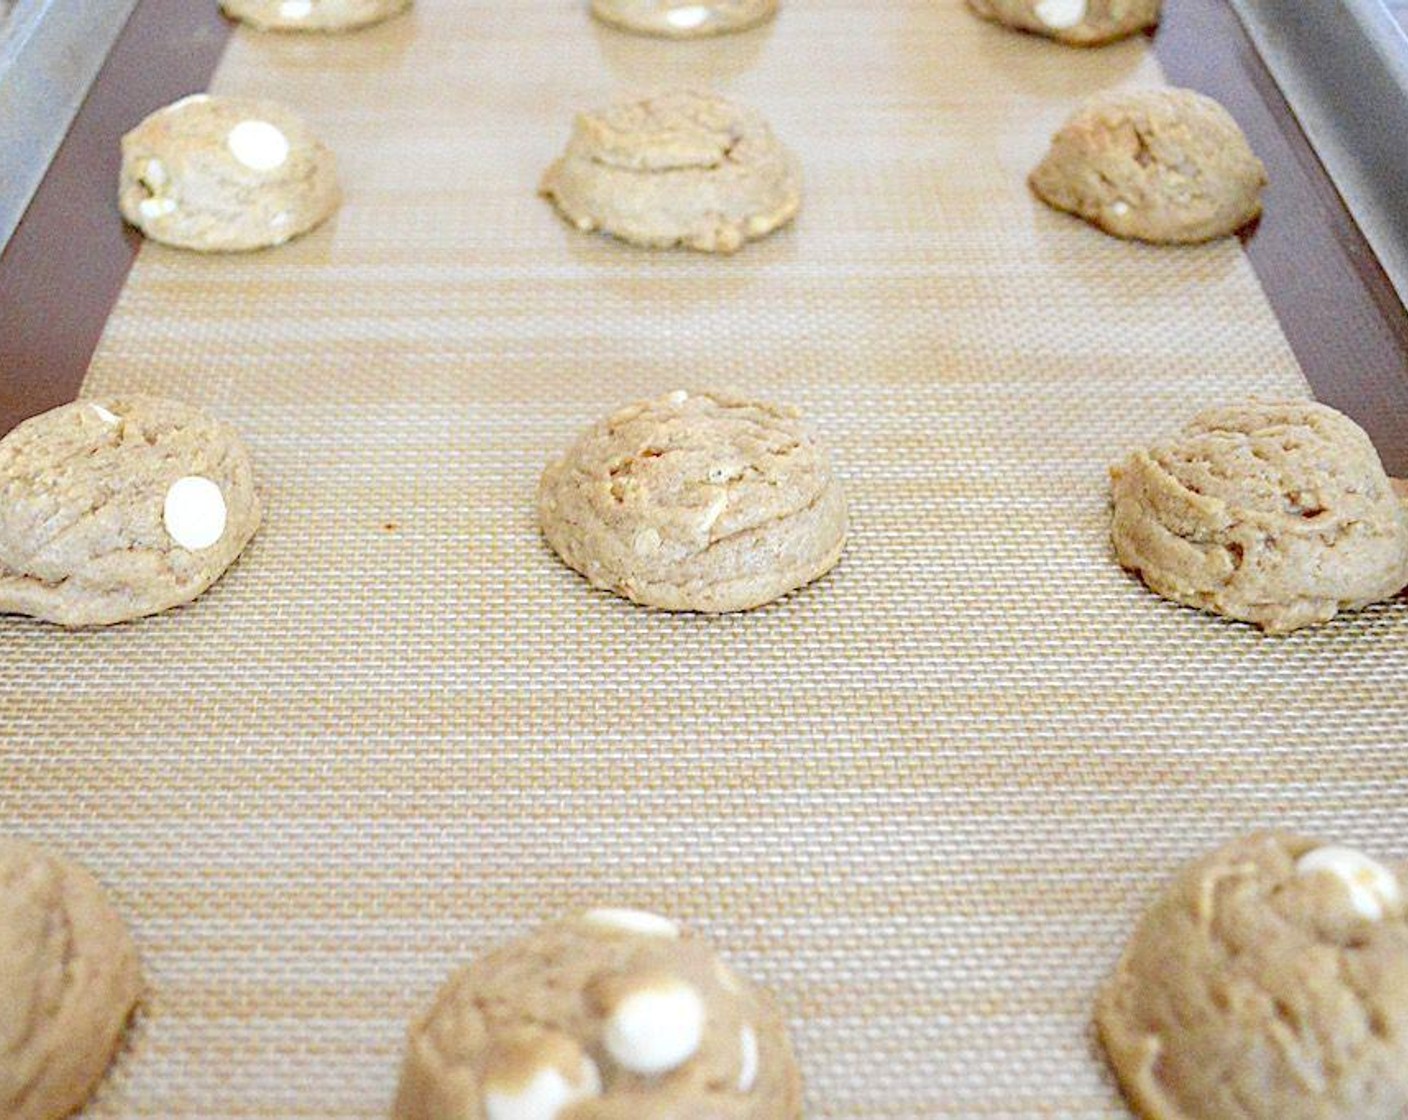 step 4 Use a 1.5 inch scoop to scoop perfect mounds of dough right into the lined baking sheets, filling each tray with 12. Bake them for 10-12 minutes, until golden and just starting to crisp up around the edges. Let them cool for about 10 minutes before transferring them to cooling racks to cool completely.